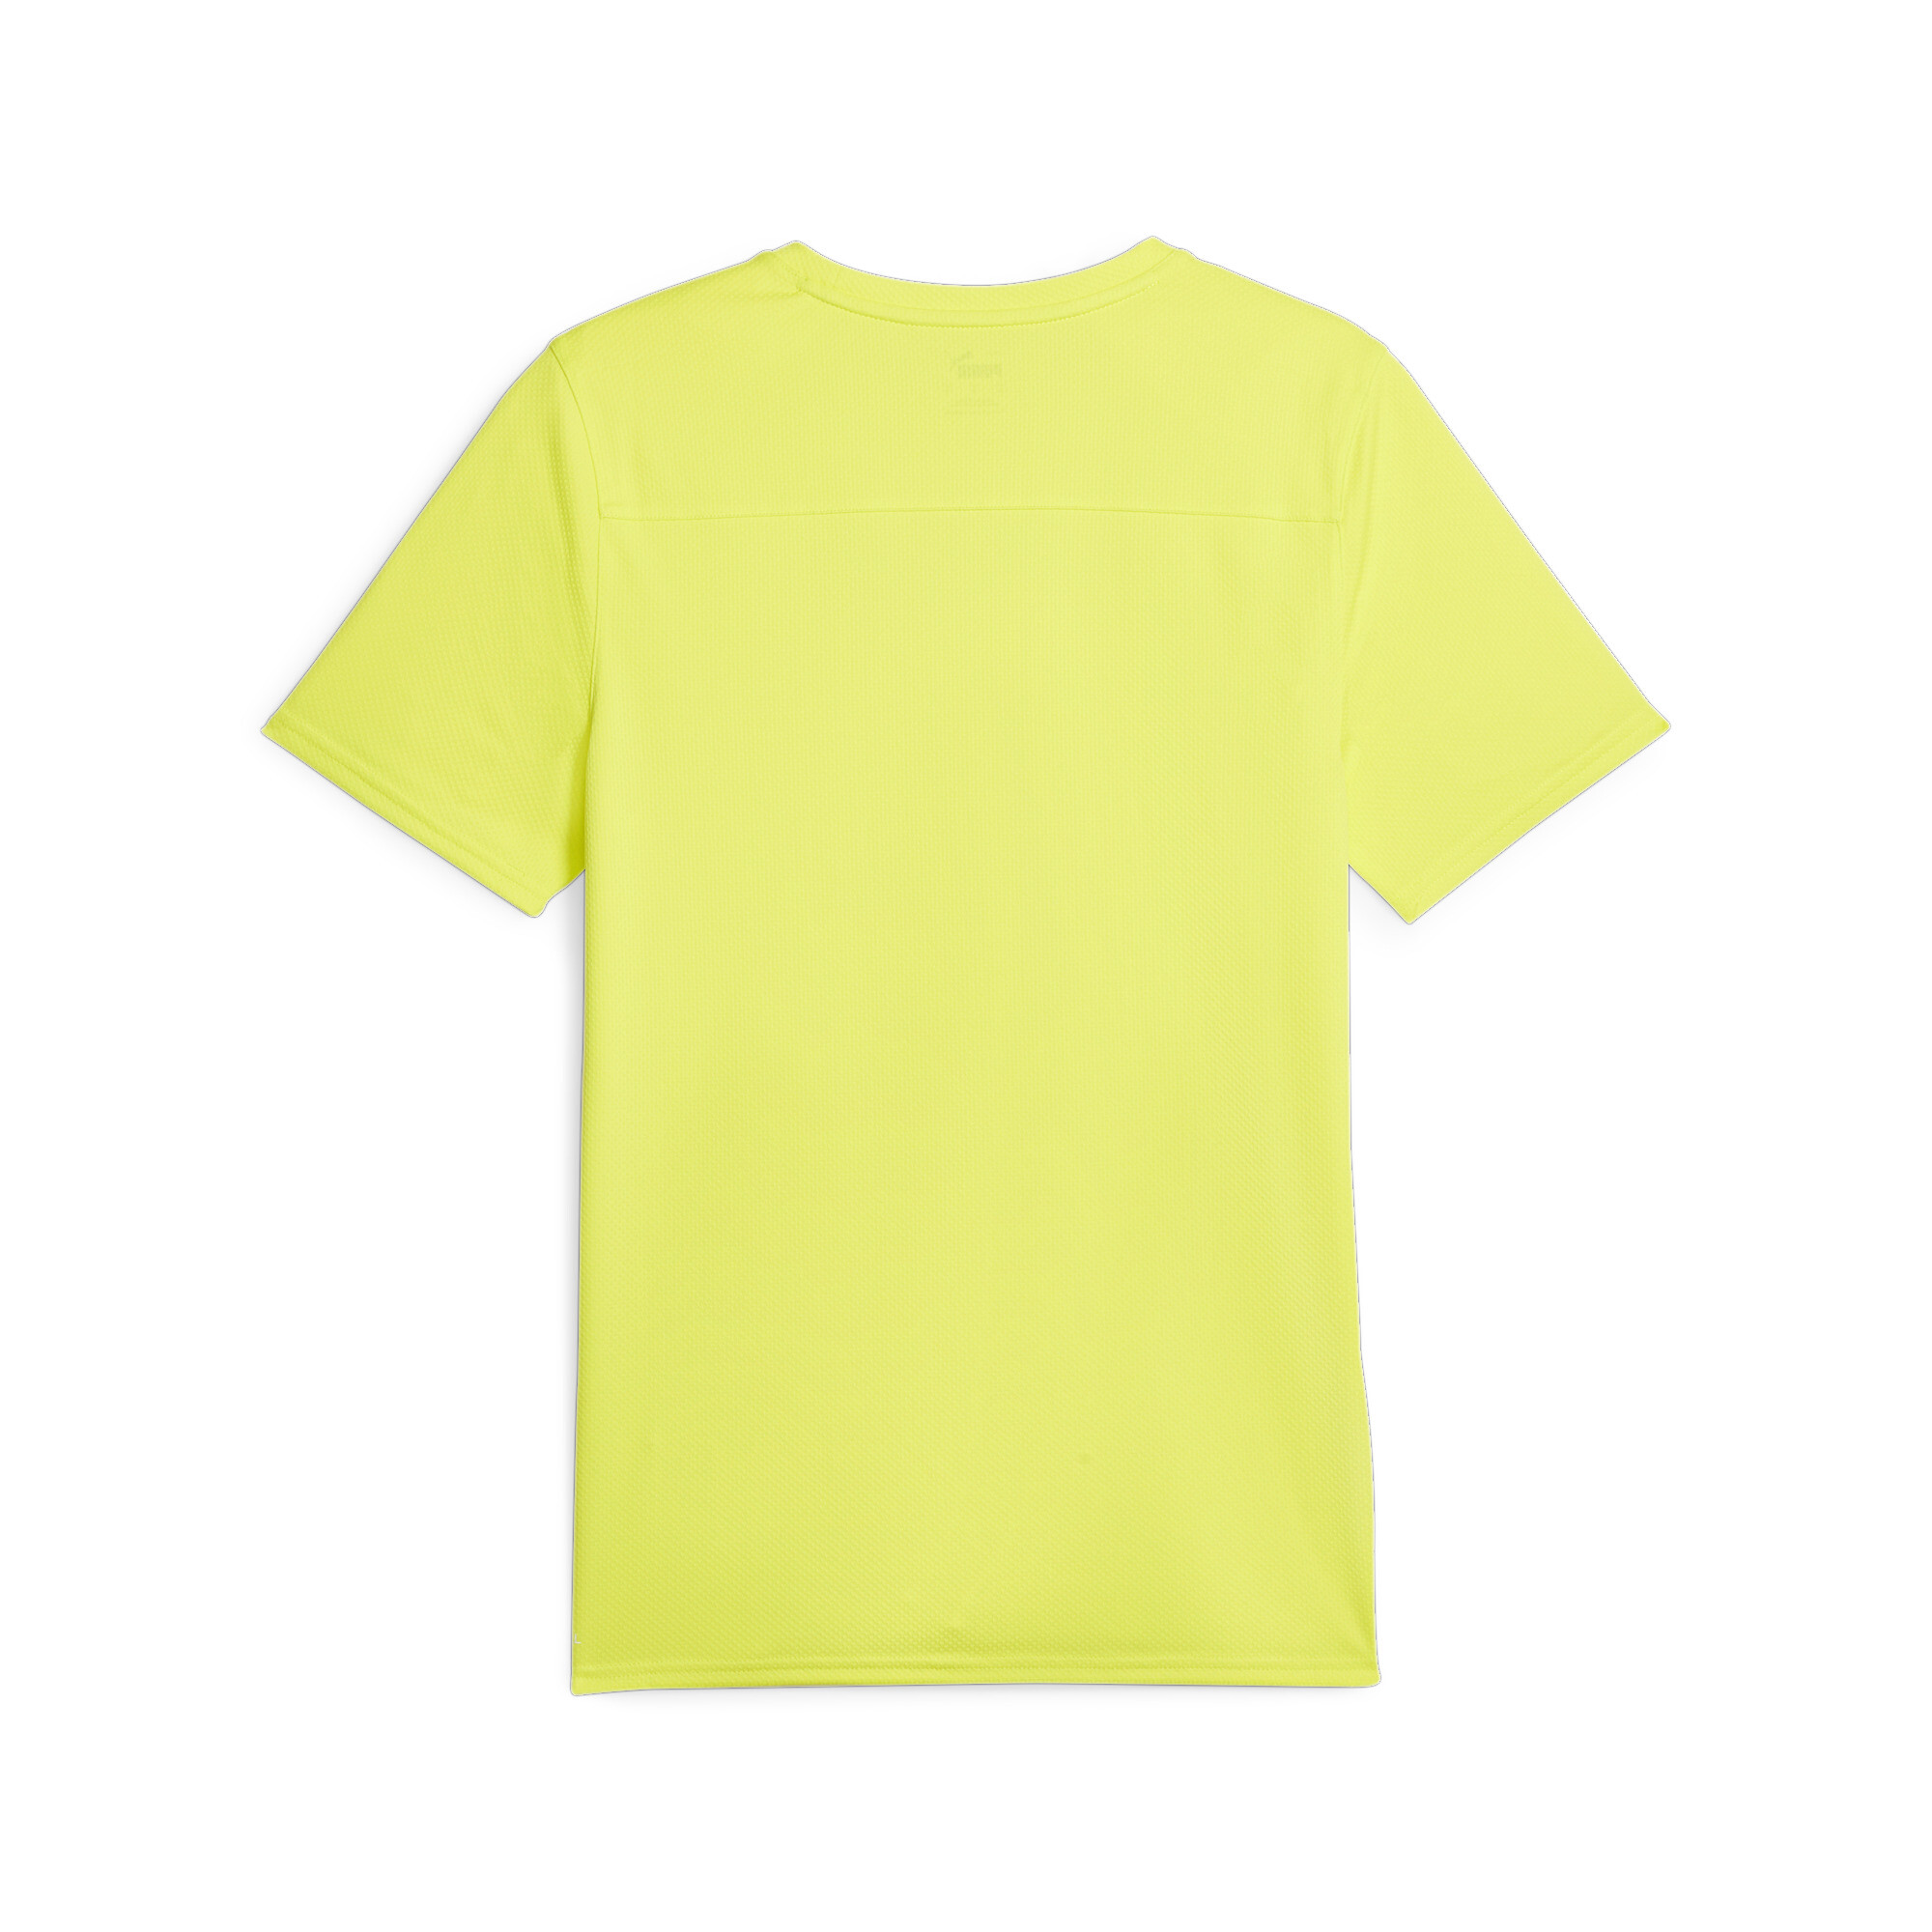 Men's Puma Fit Ultrabreathe T-Shirt In Yellow, Size Small